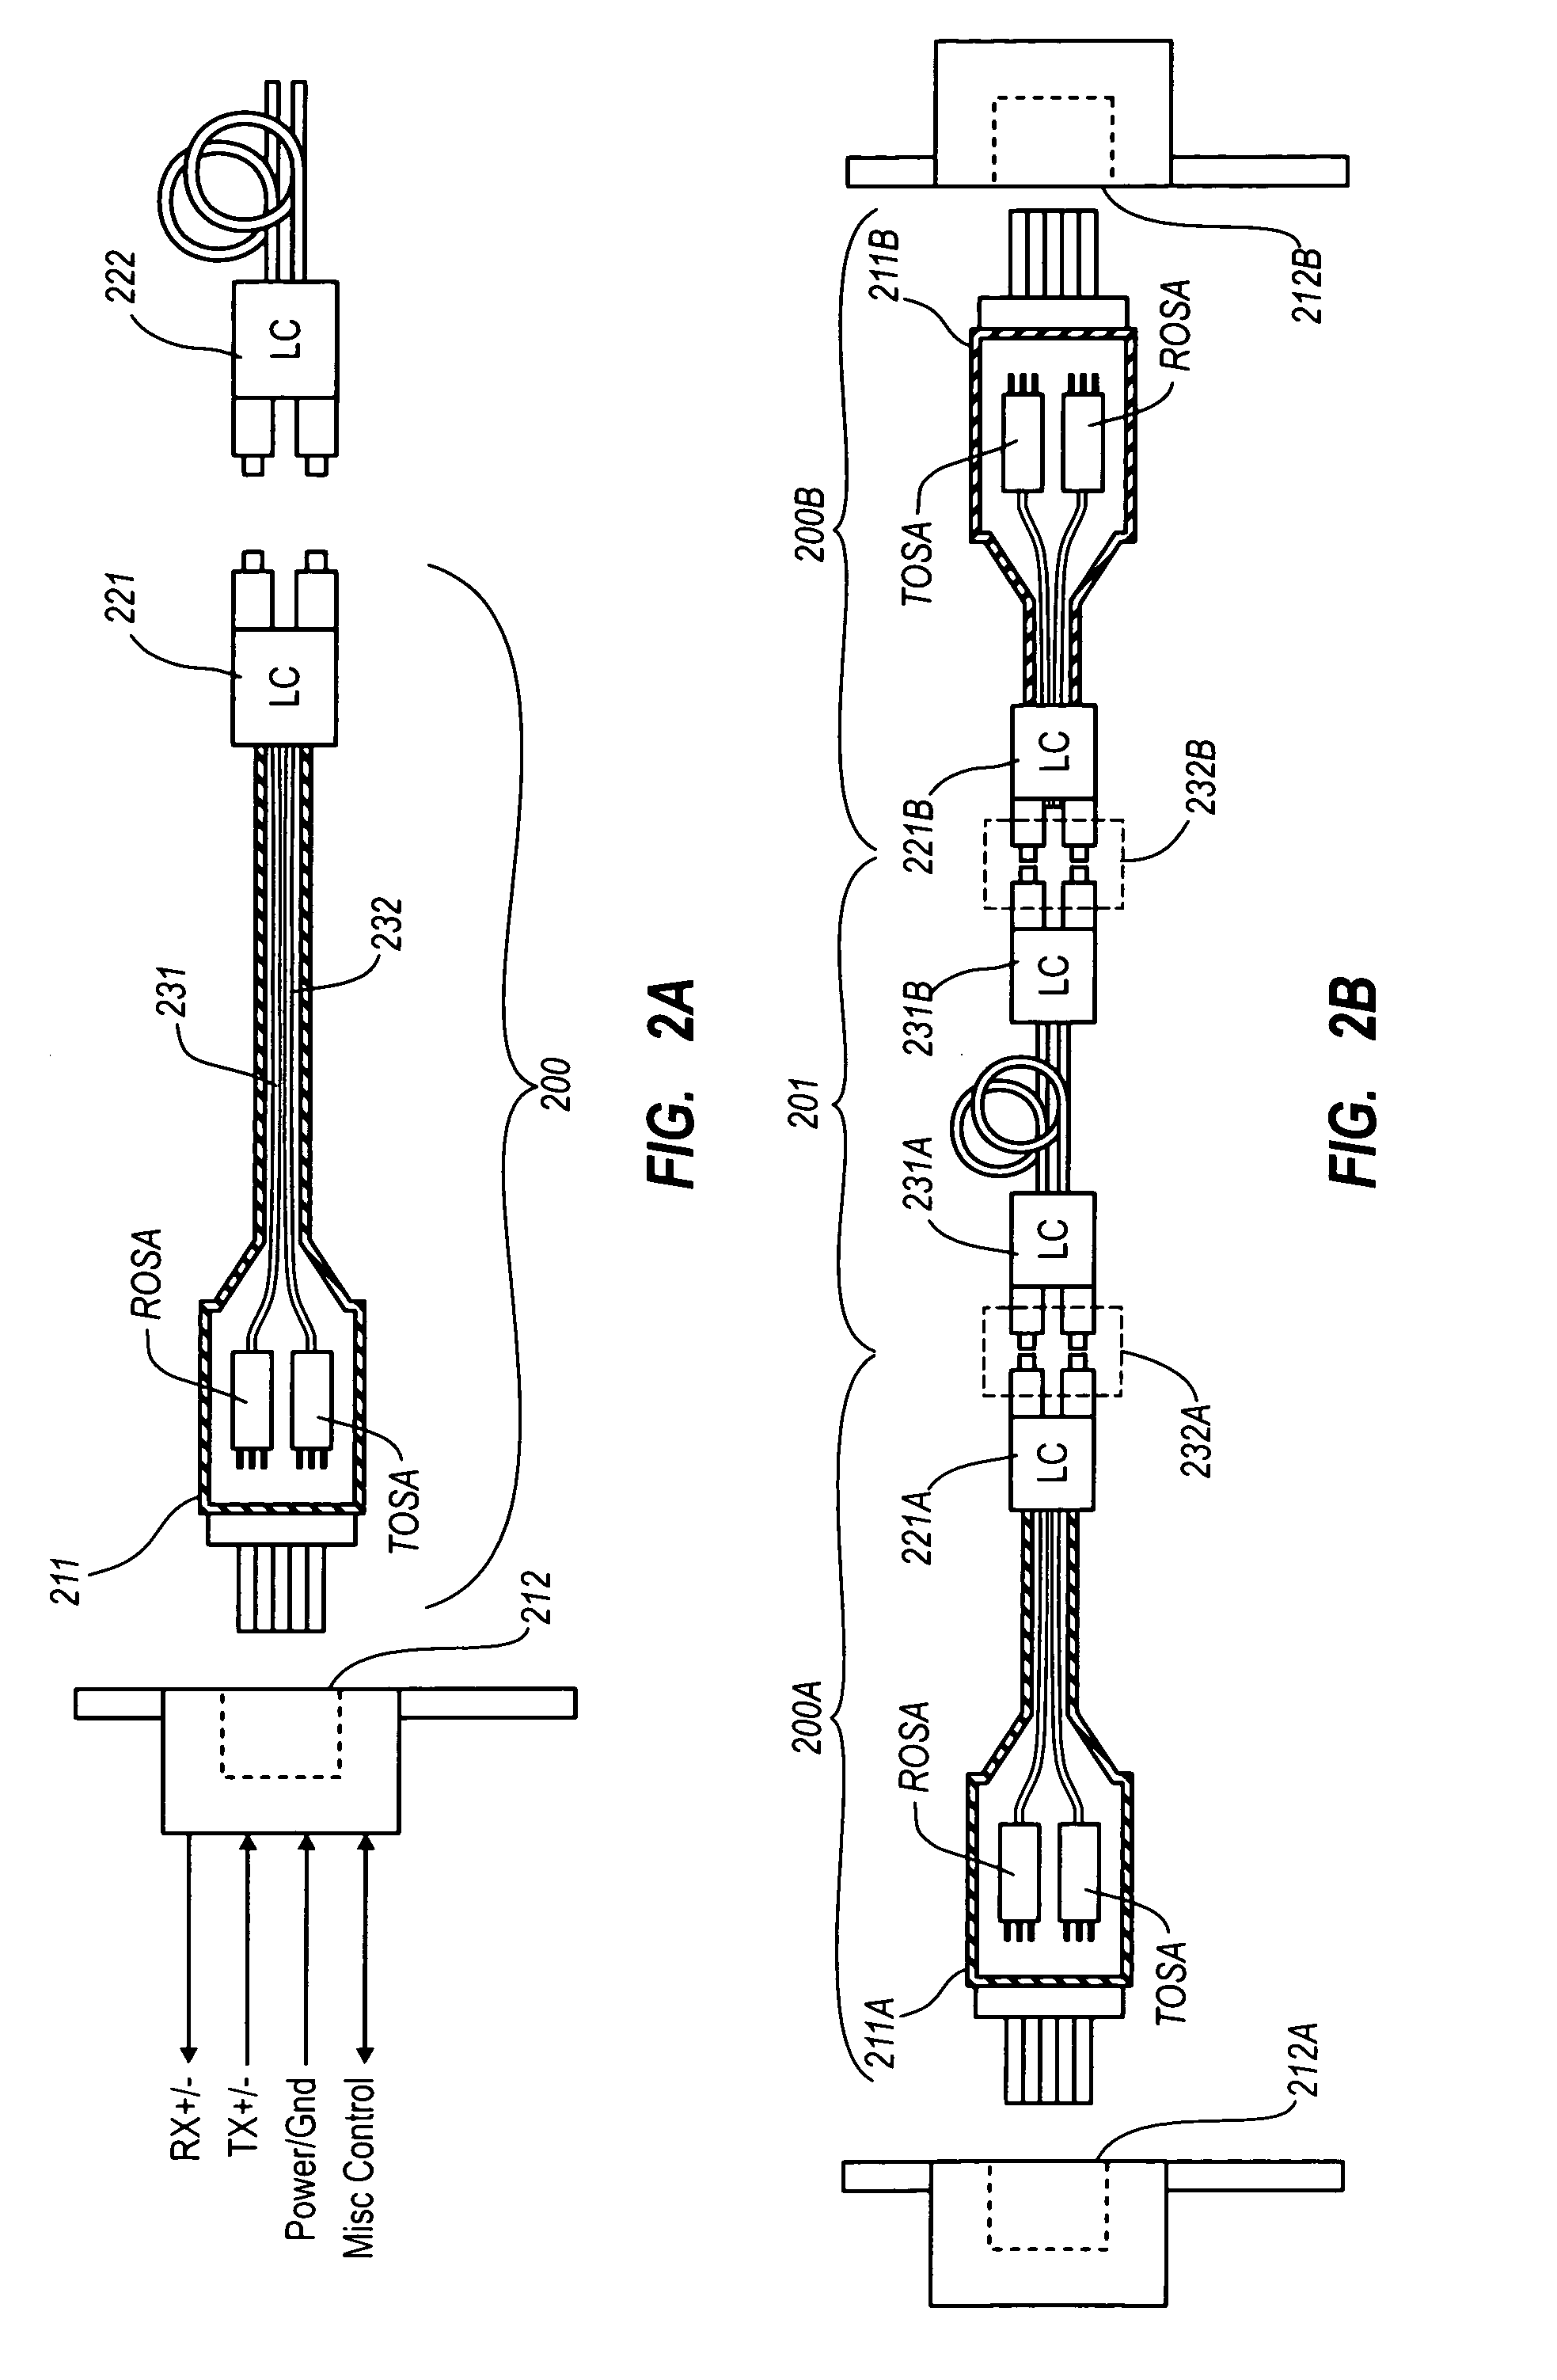 Active optical cable electrical adaptor